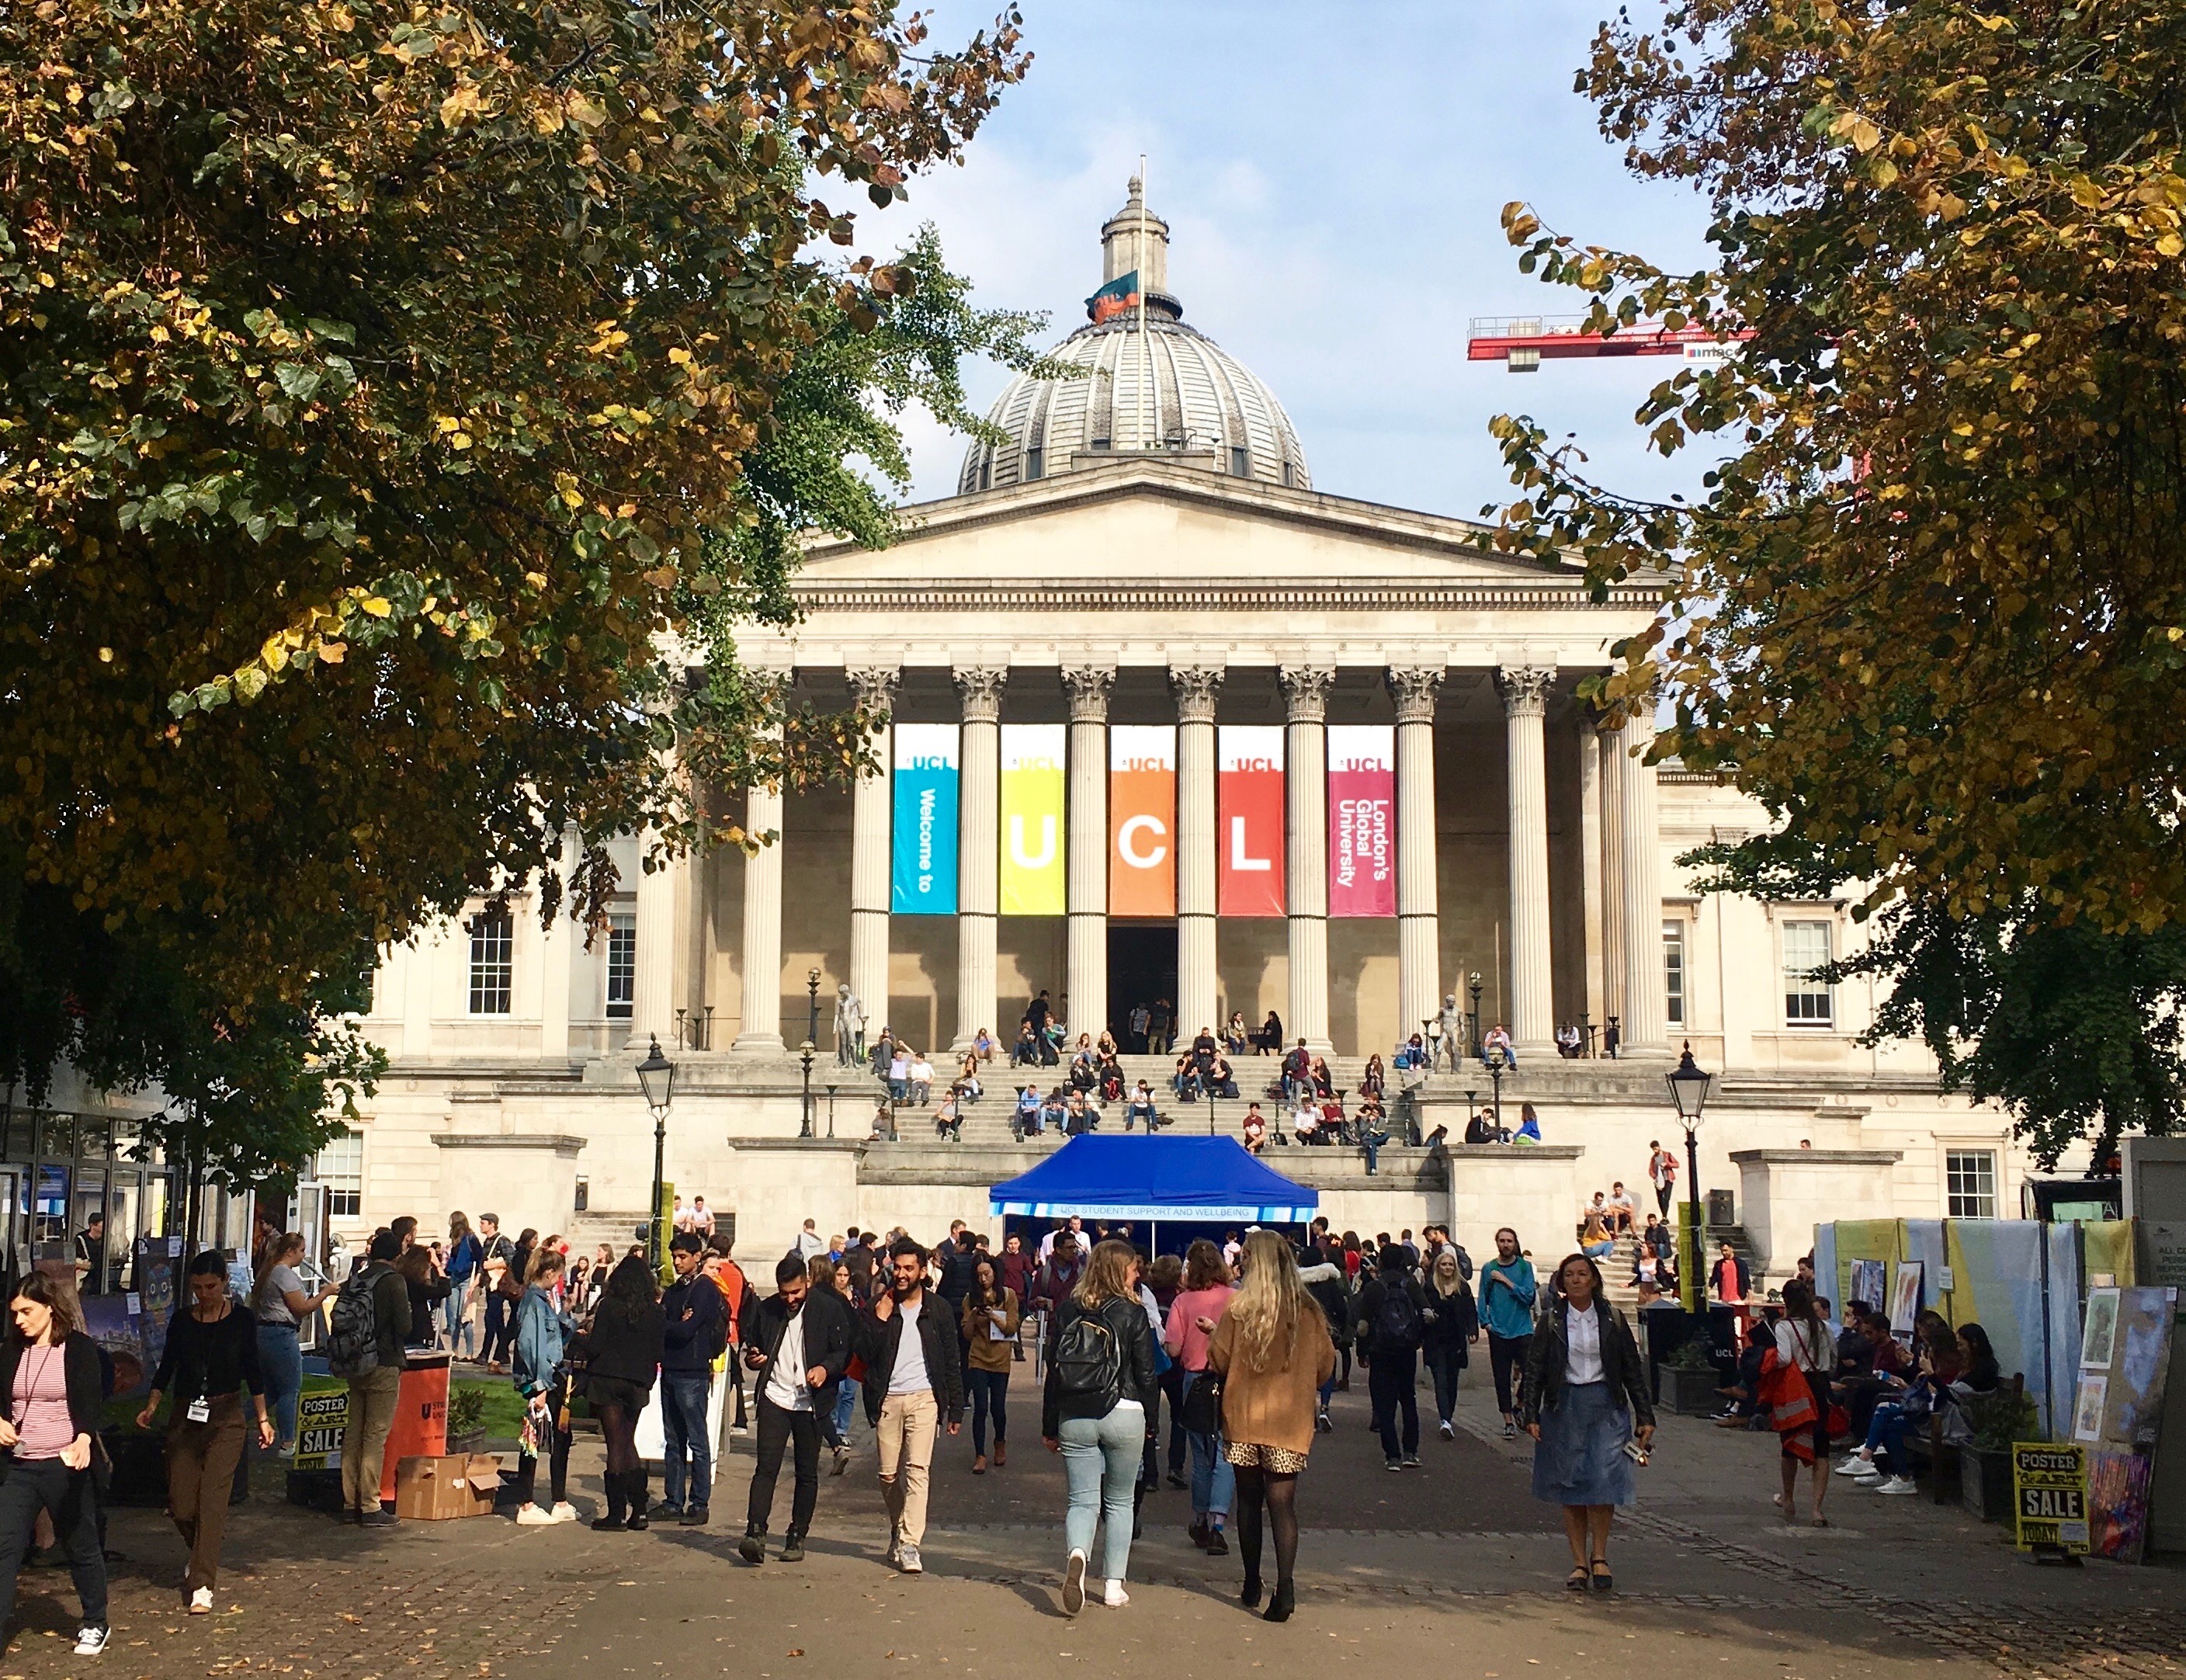 Ucl : Ucl students hail from around 150 countries, and tuition costs are higher for students